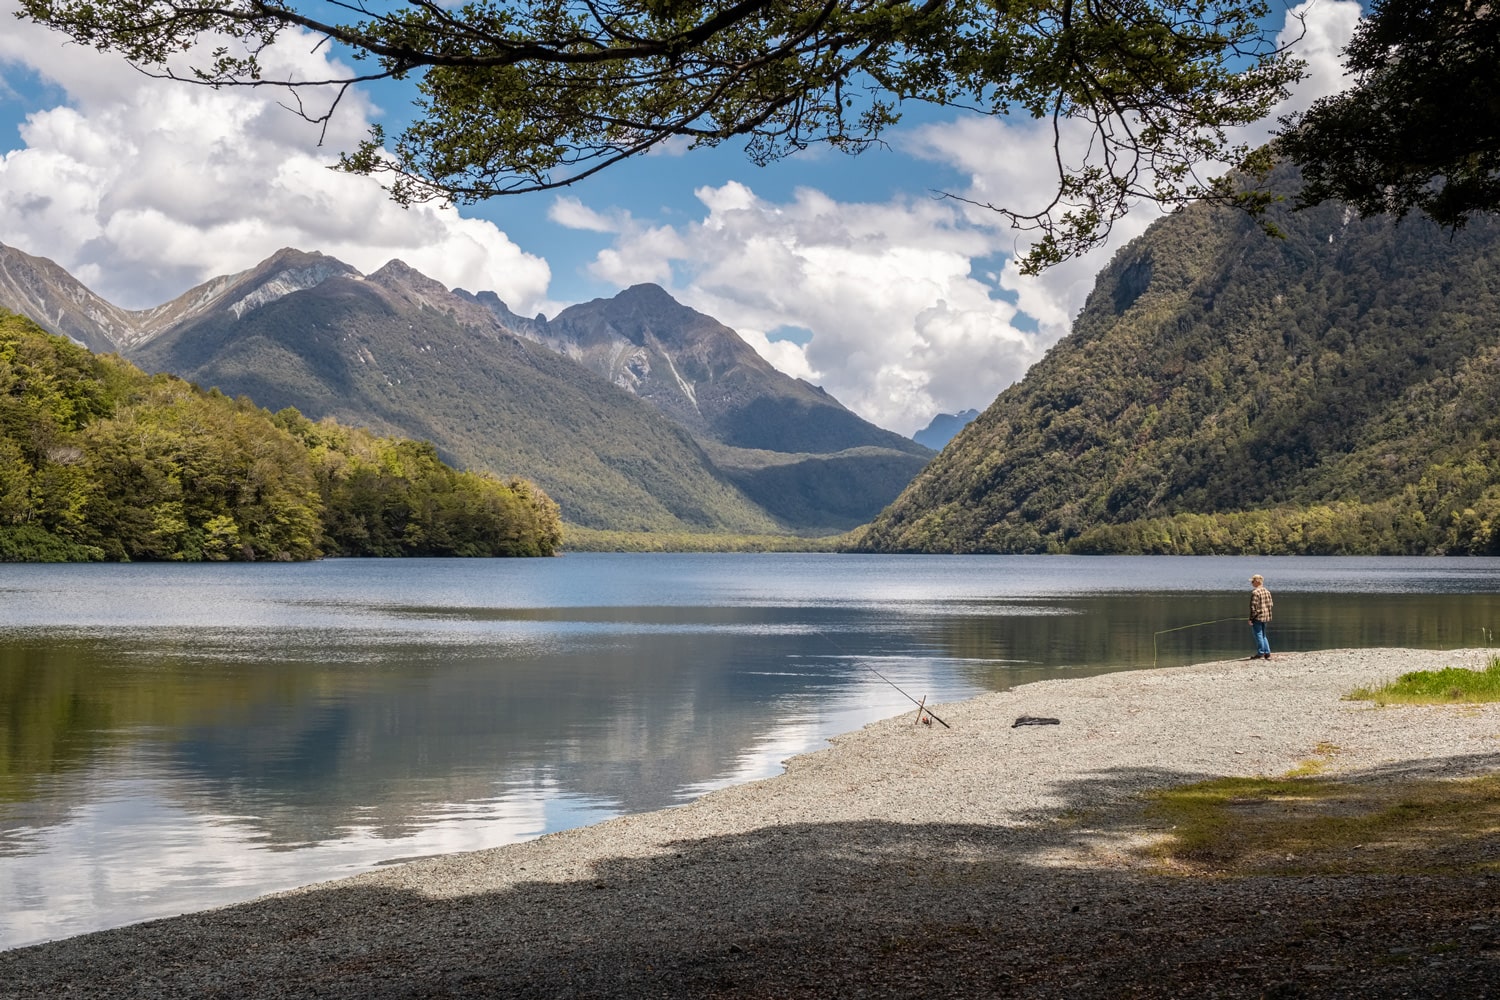 Man fishing on a New Zealand river with mountains in the background